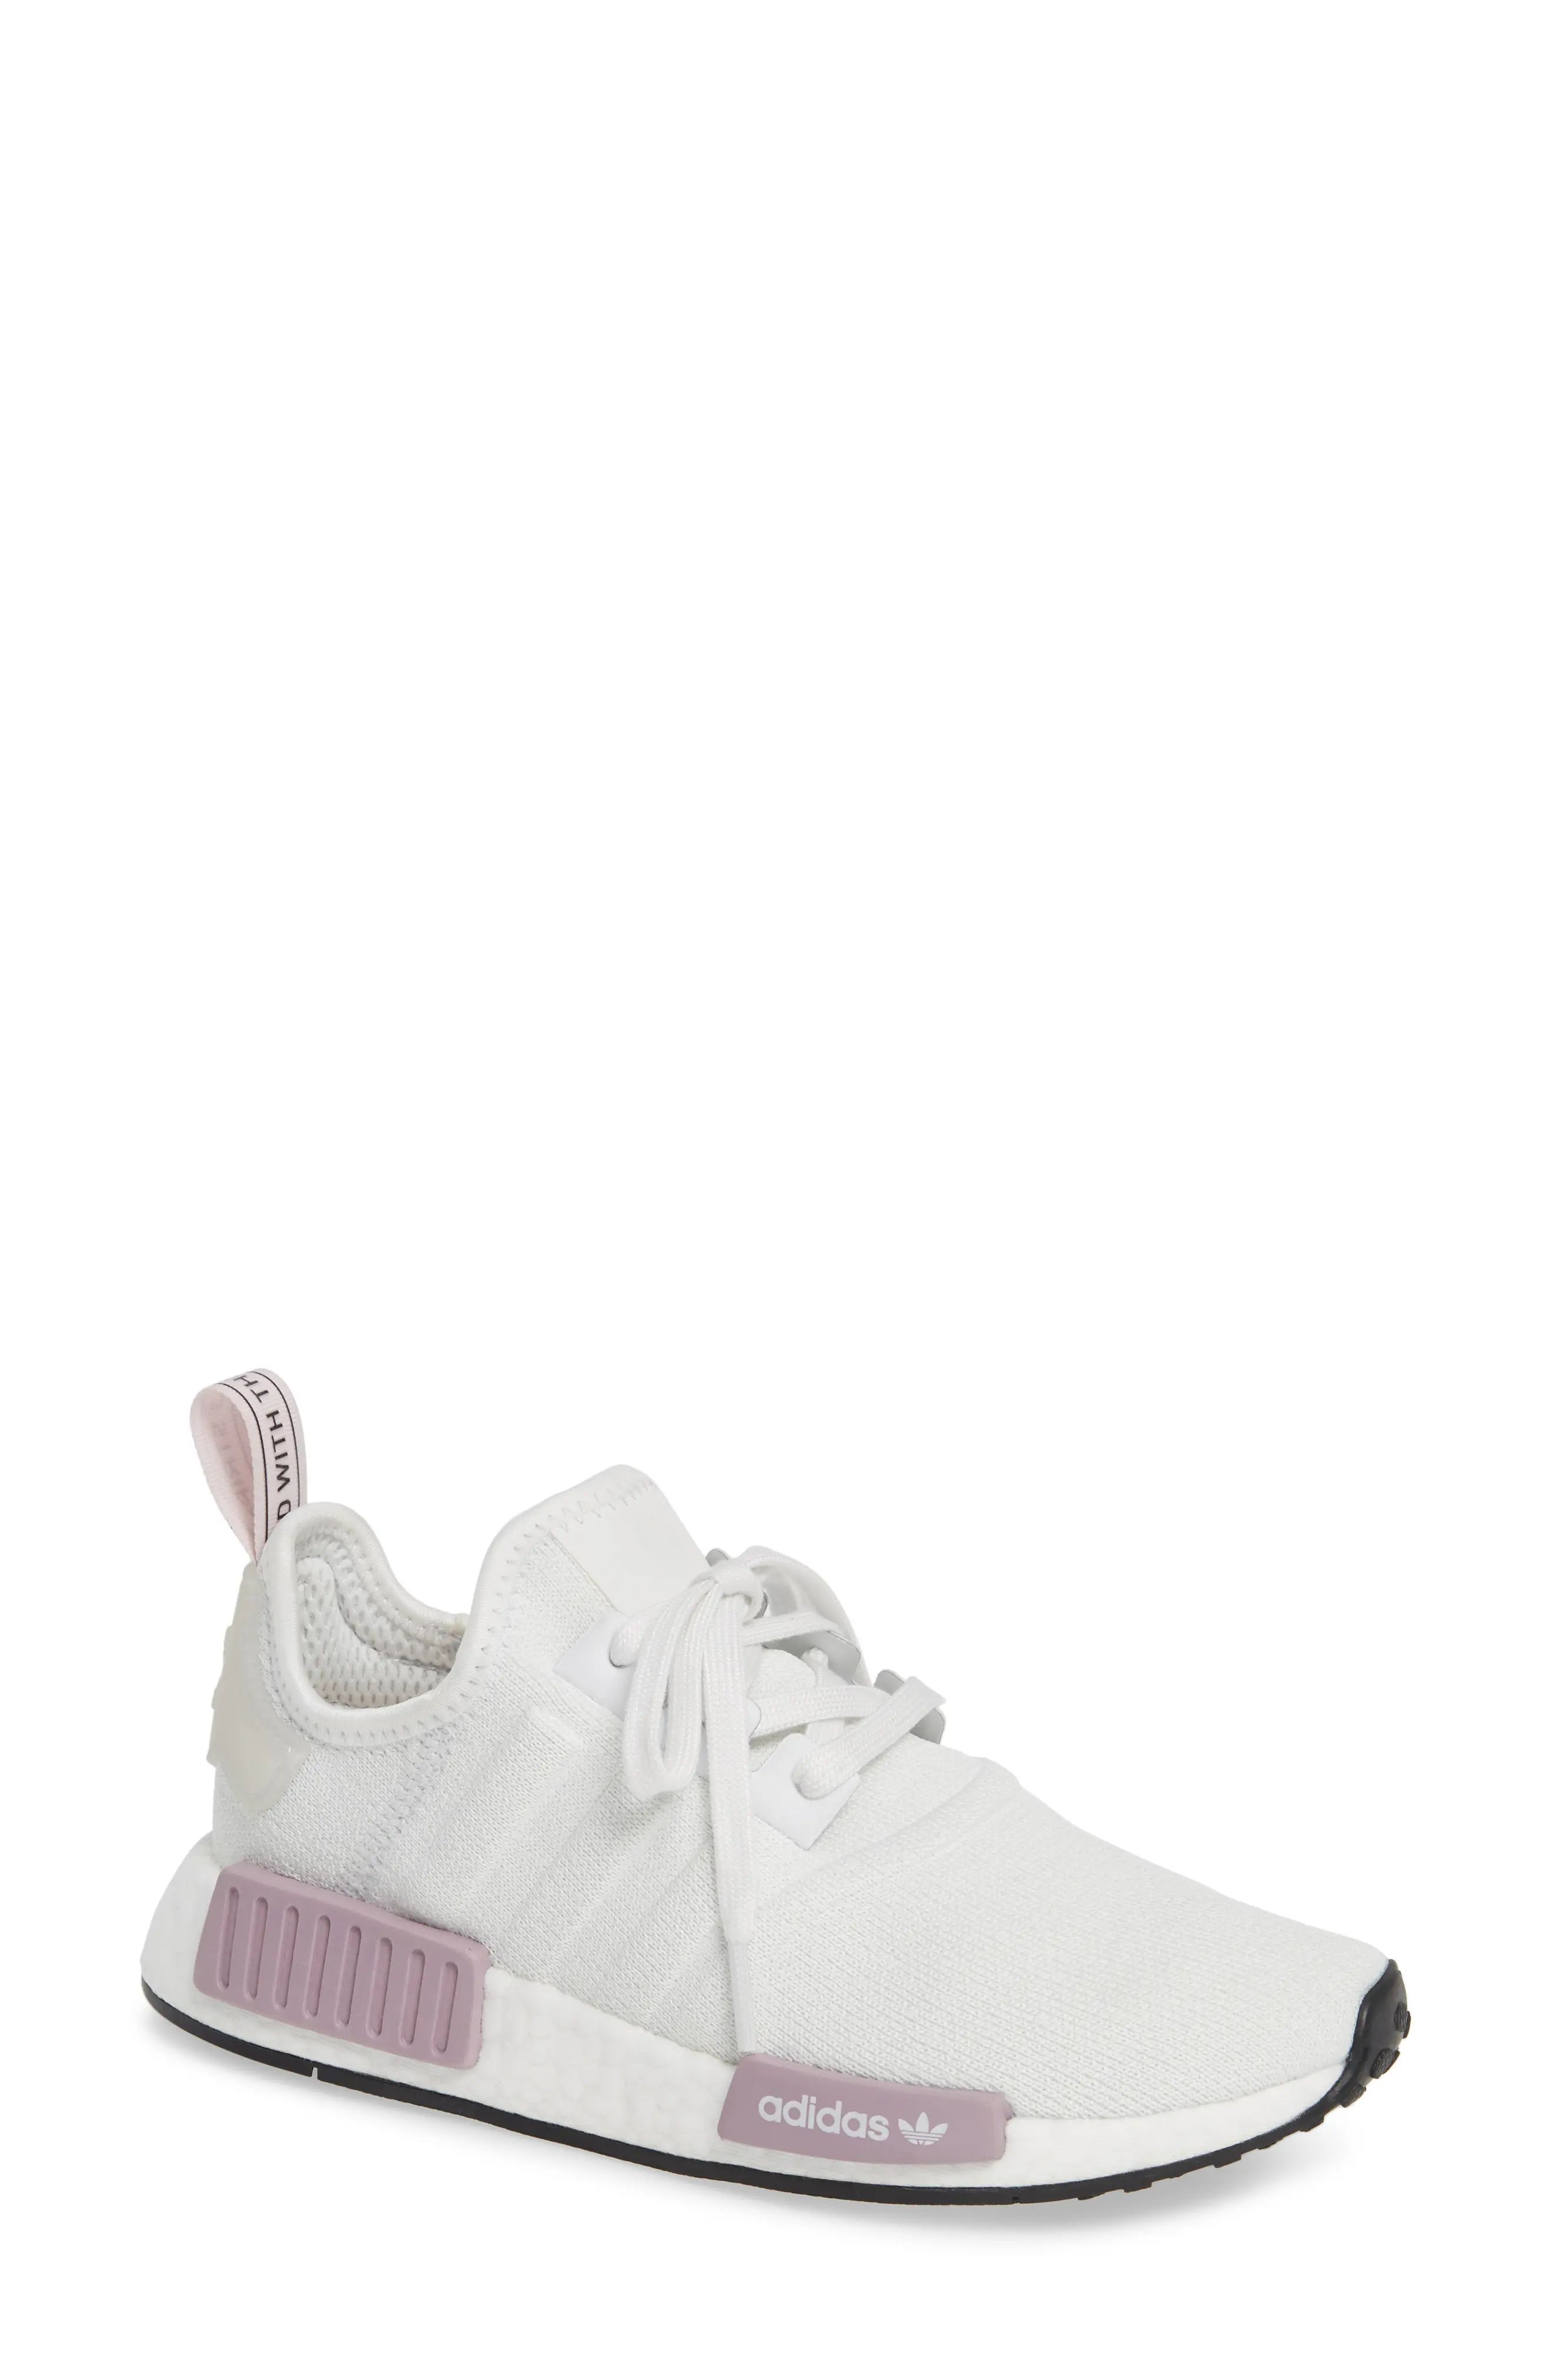 adidas NMD R1 Athletic Shoe (Women) | Nordstrom